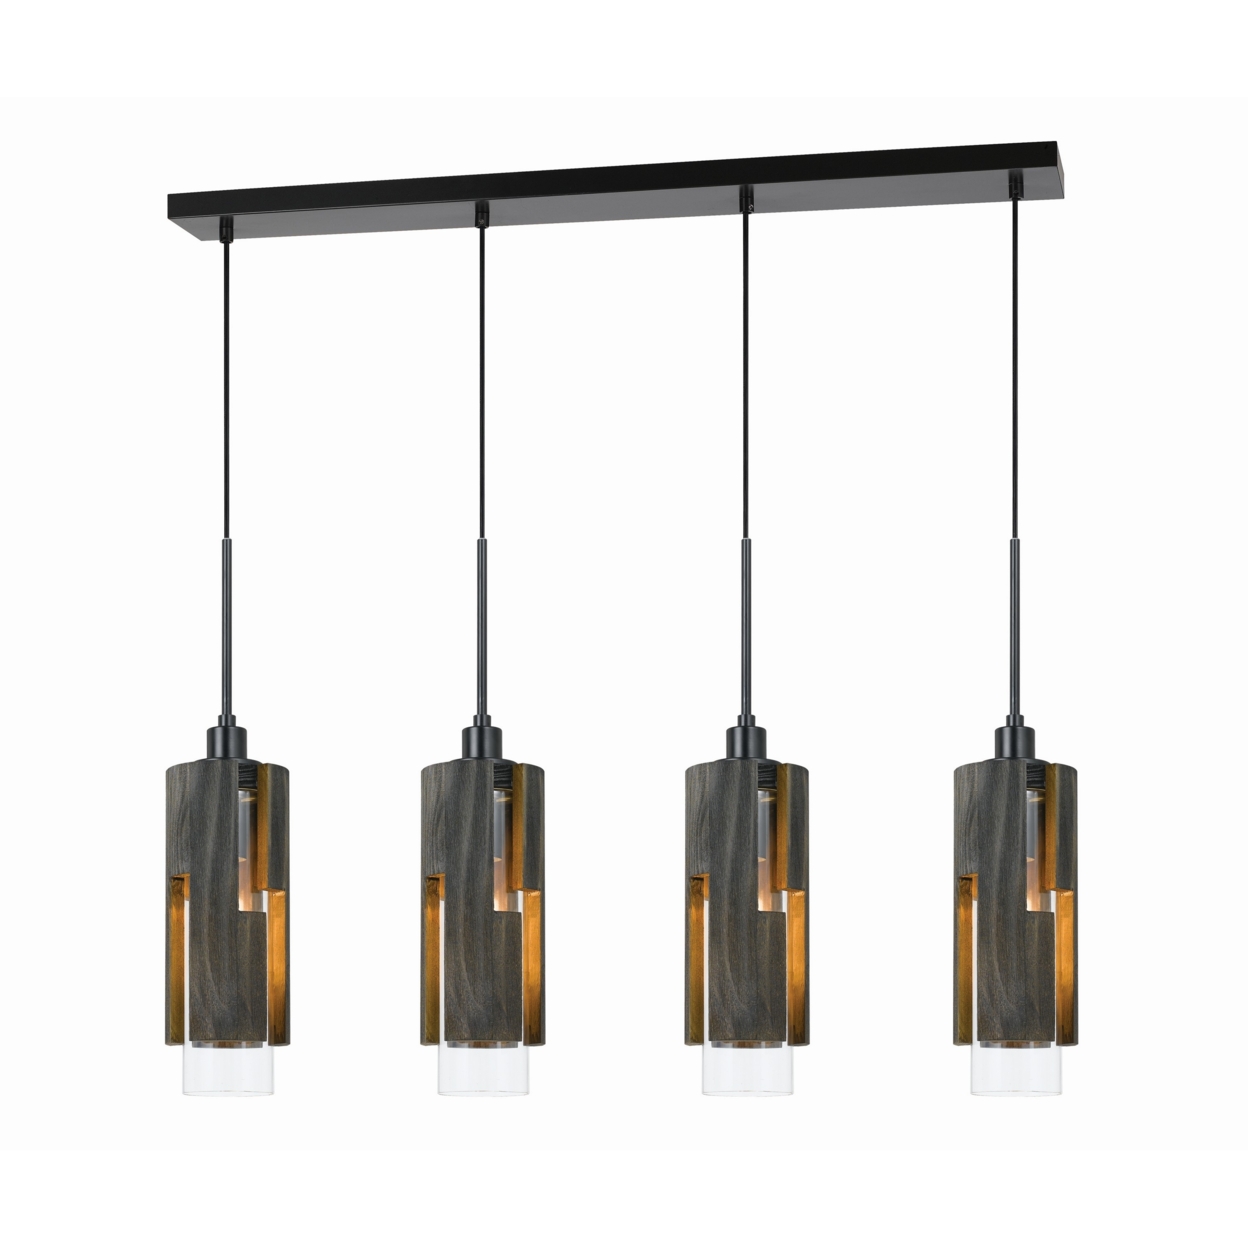 4 Light Metal Frame Pendant Fixture With Wooden And Glass Shades, Gray- Saltoro Sherpi